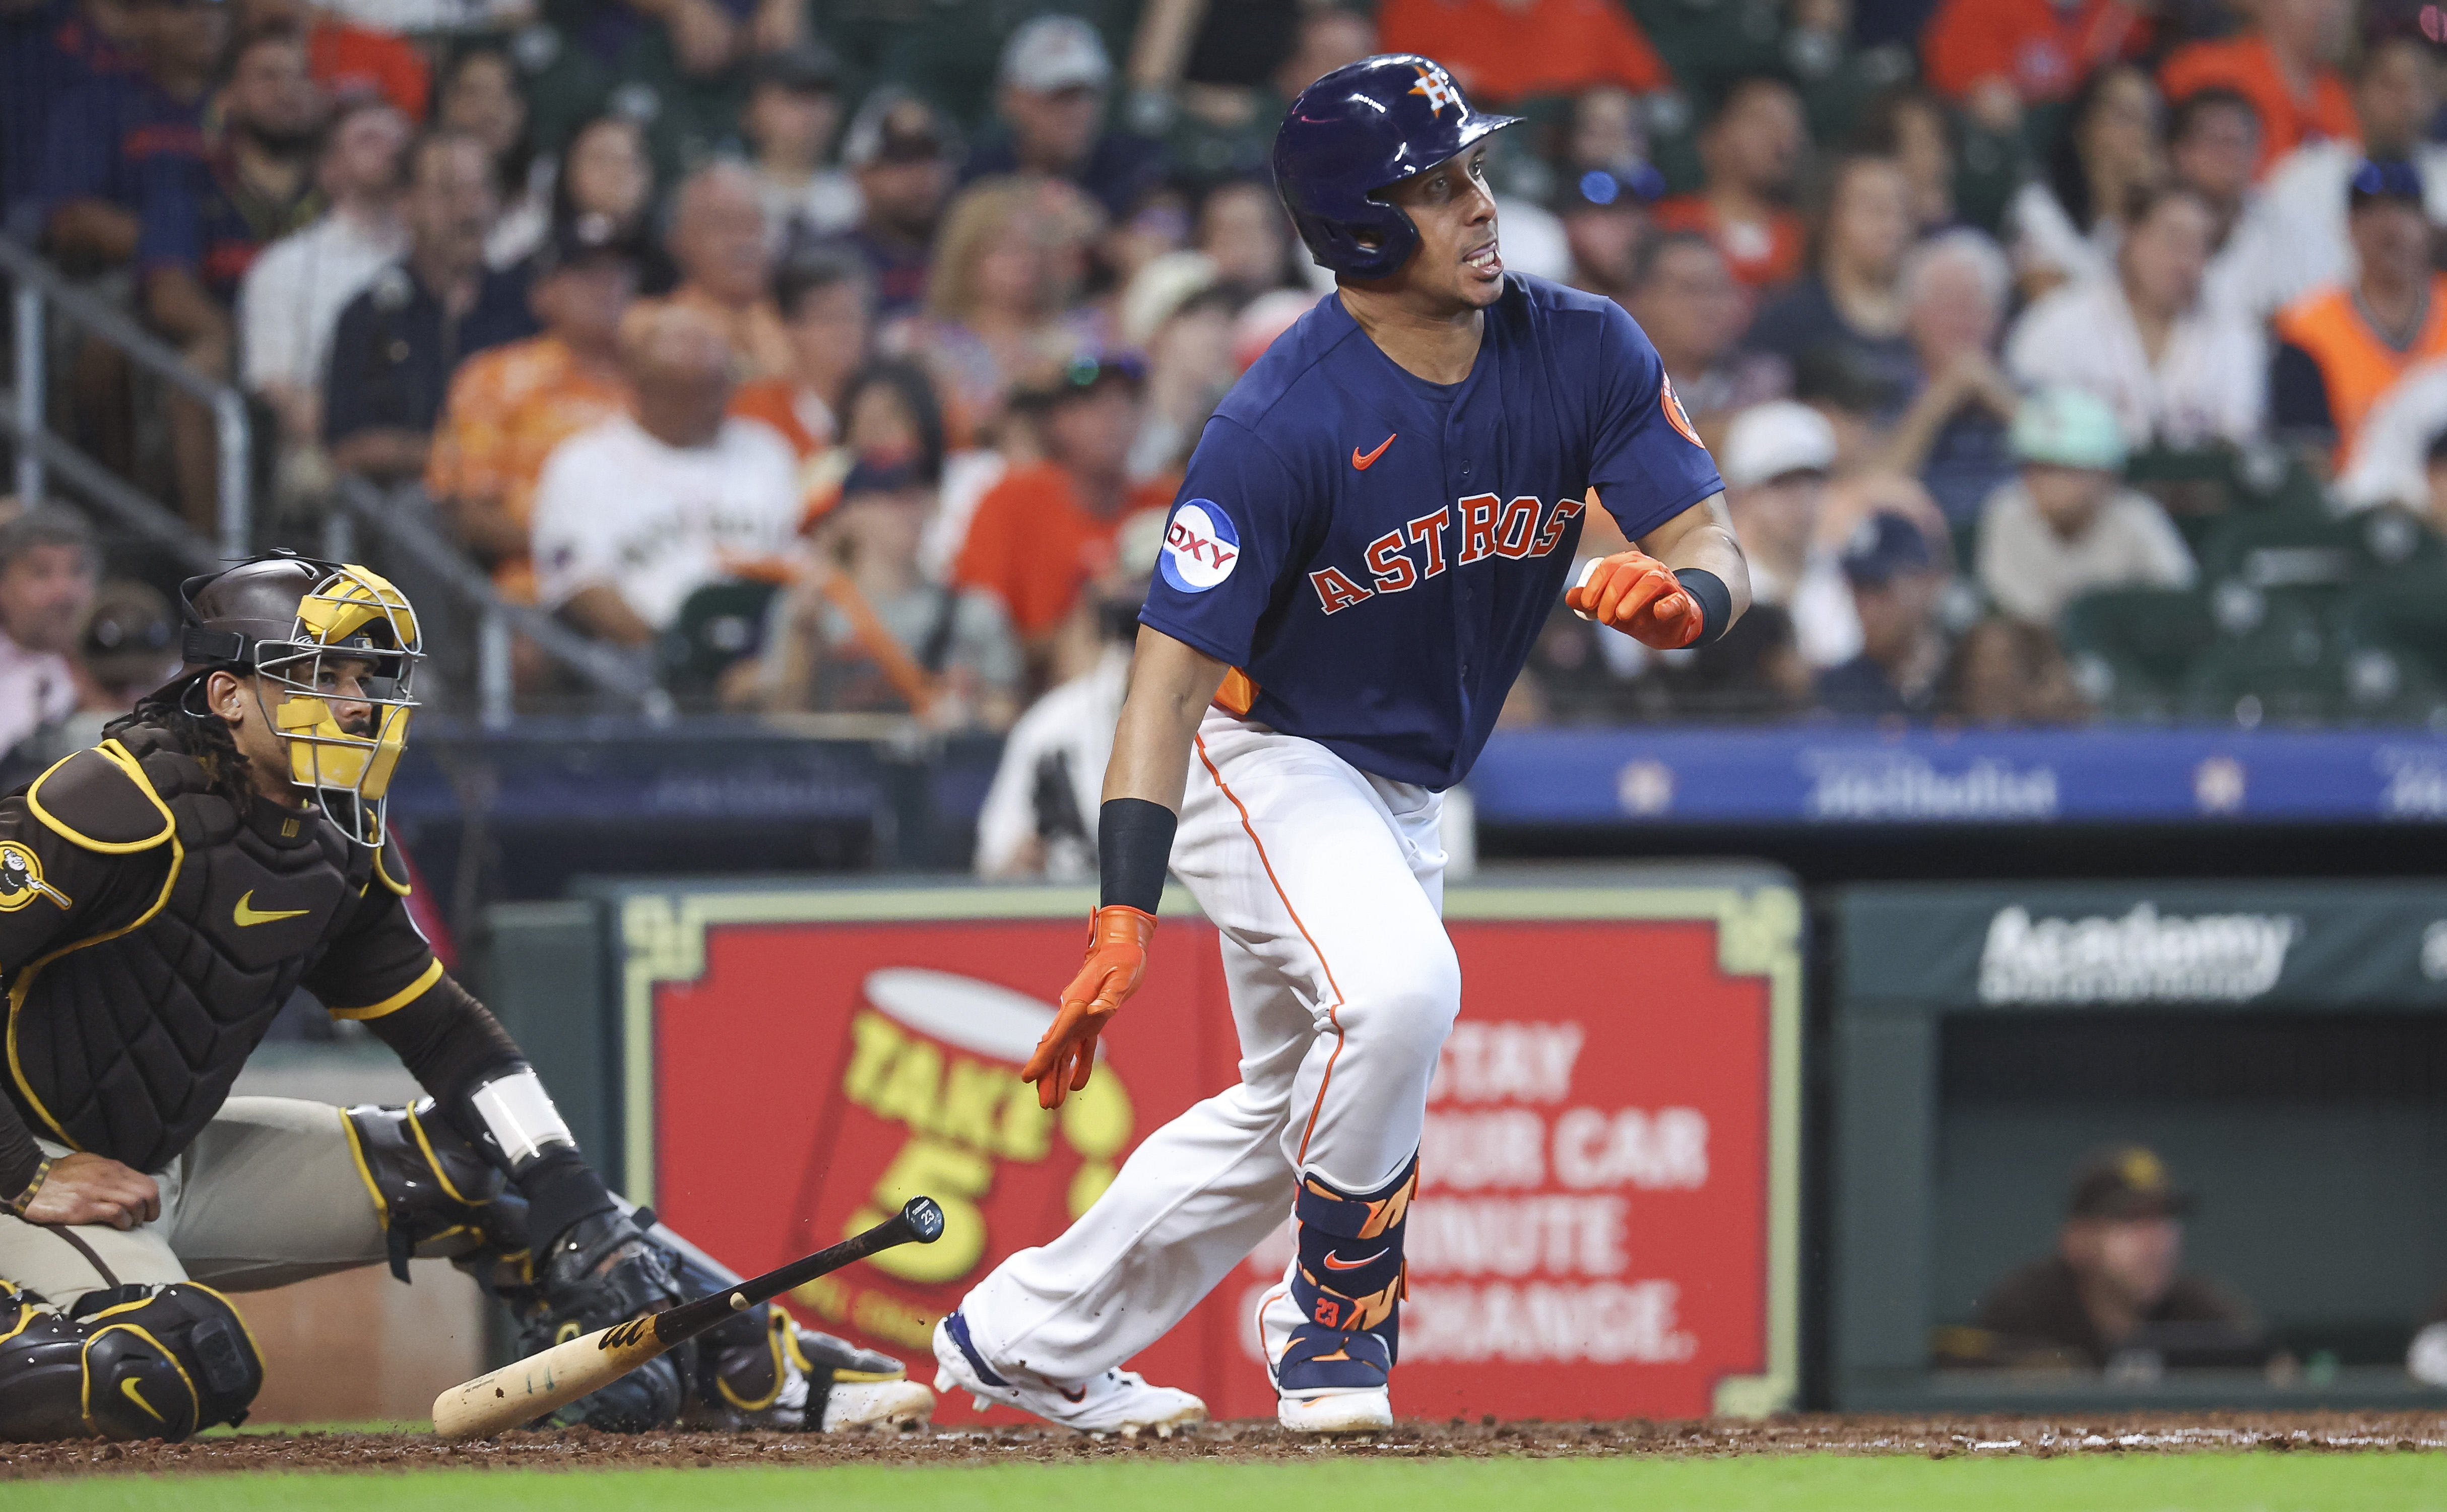 Houston Astros put outfielder Michael Brantley on IL with knee soreness 